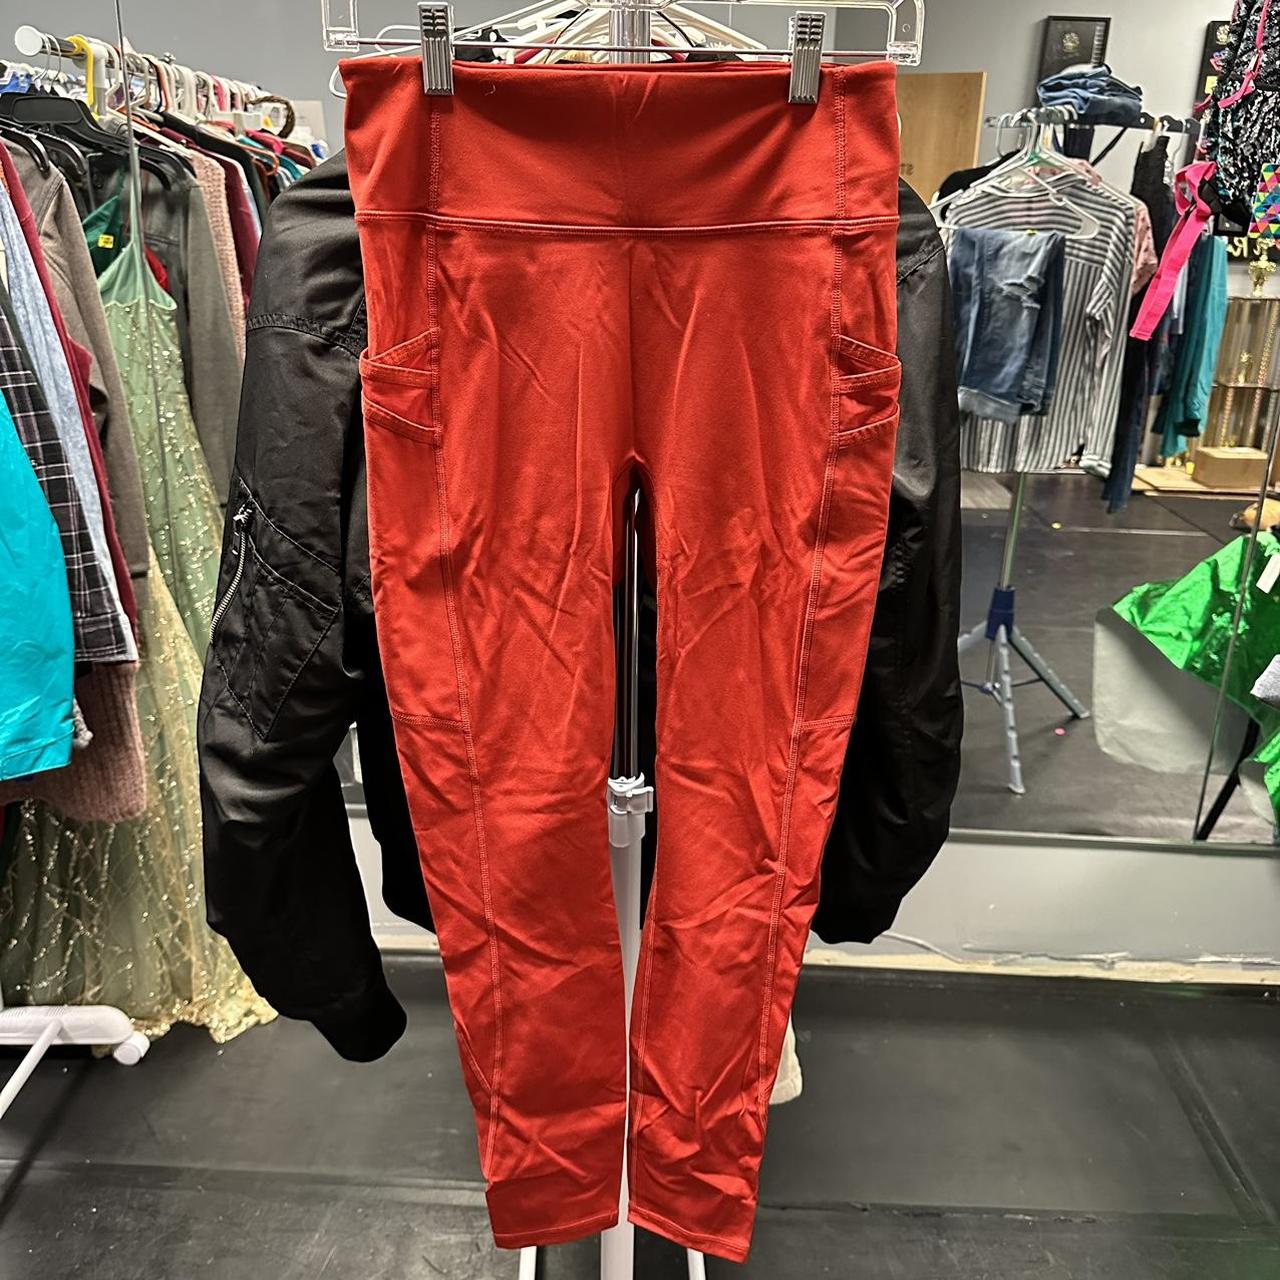 Red fabletics long leggings- very stretchy and comfy - Depop